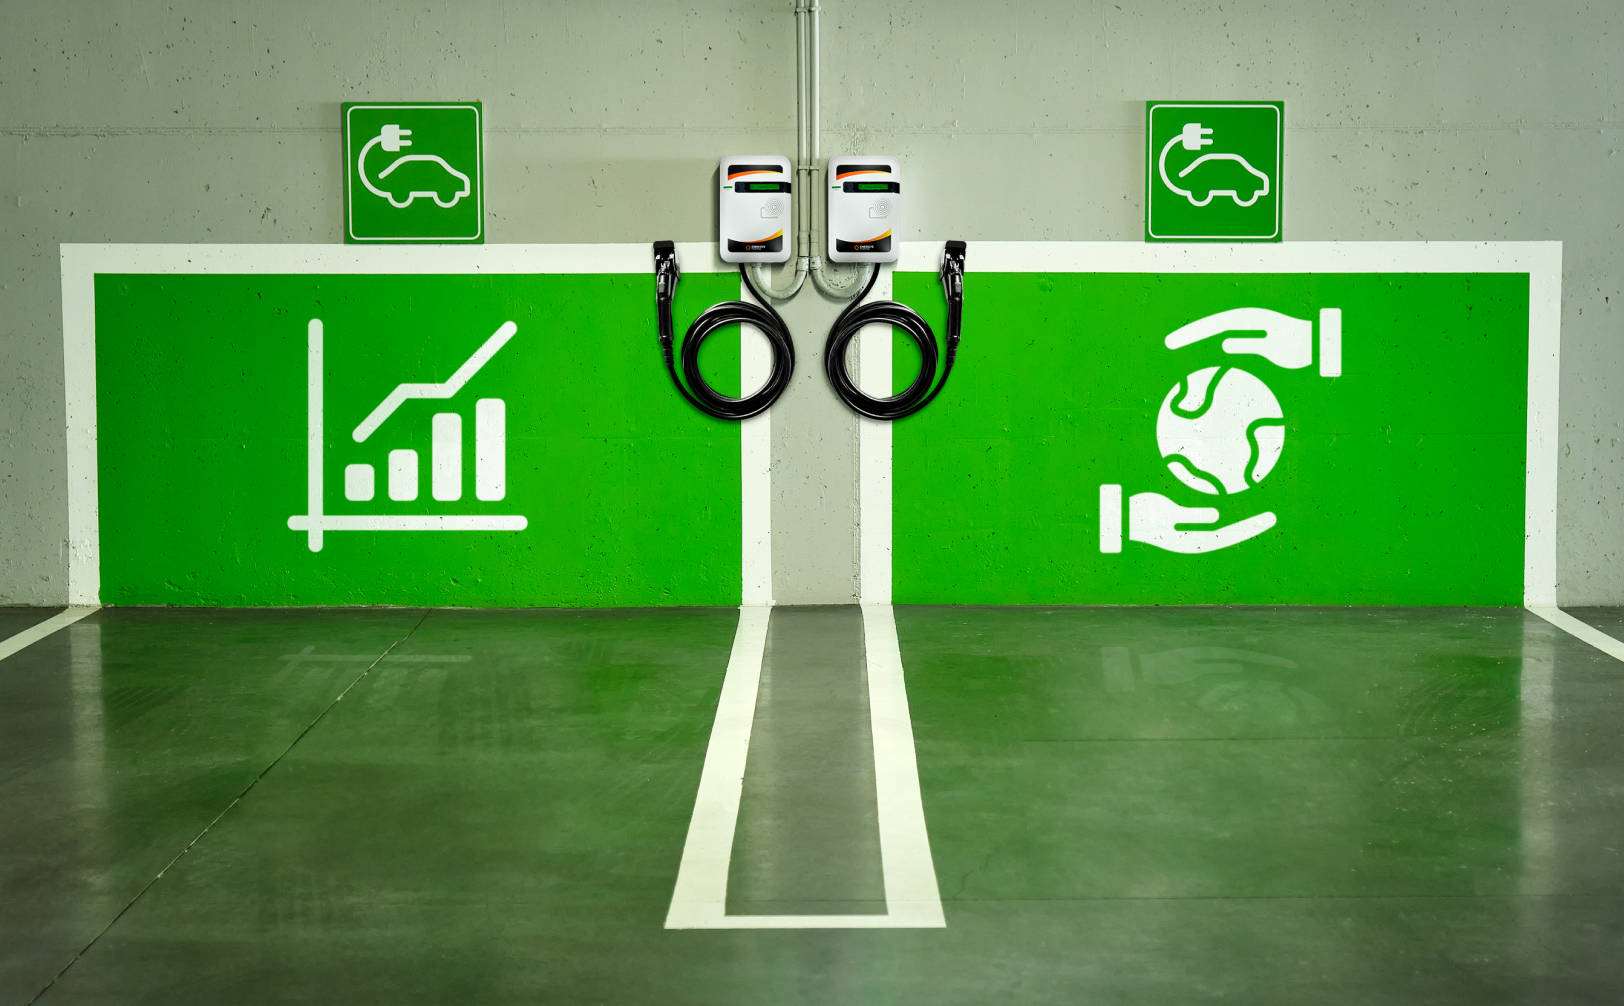 Public EV Charging Stations: Trend, Business, or Environmental Protection?